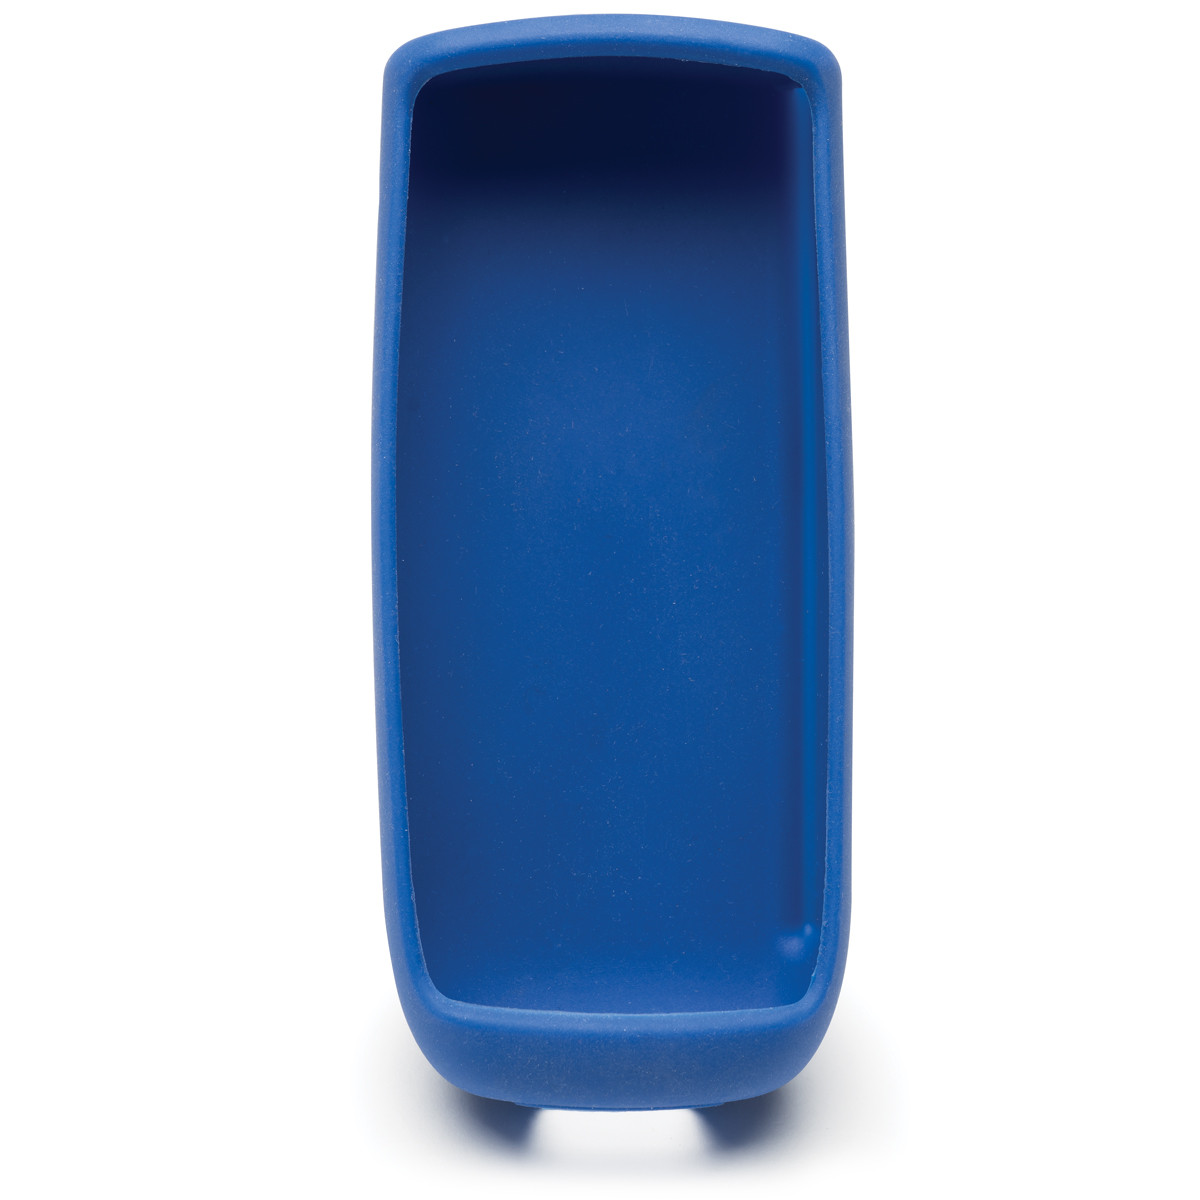 Blue Shockproof Rubber Boot for Interchangeable Probes